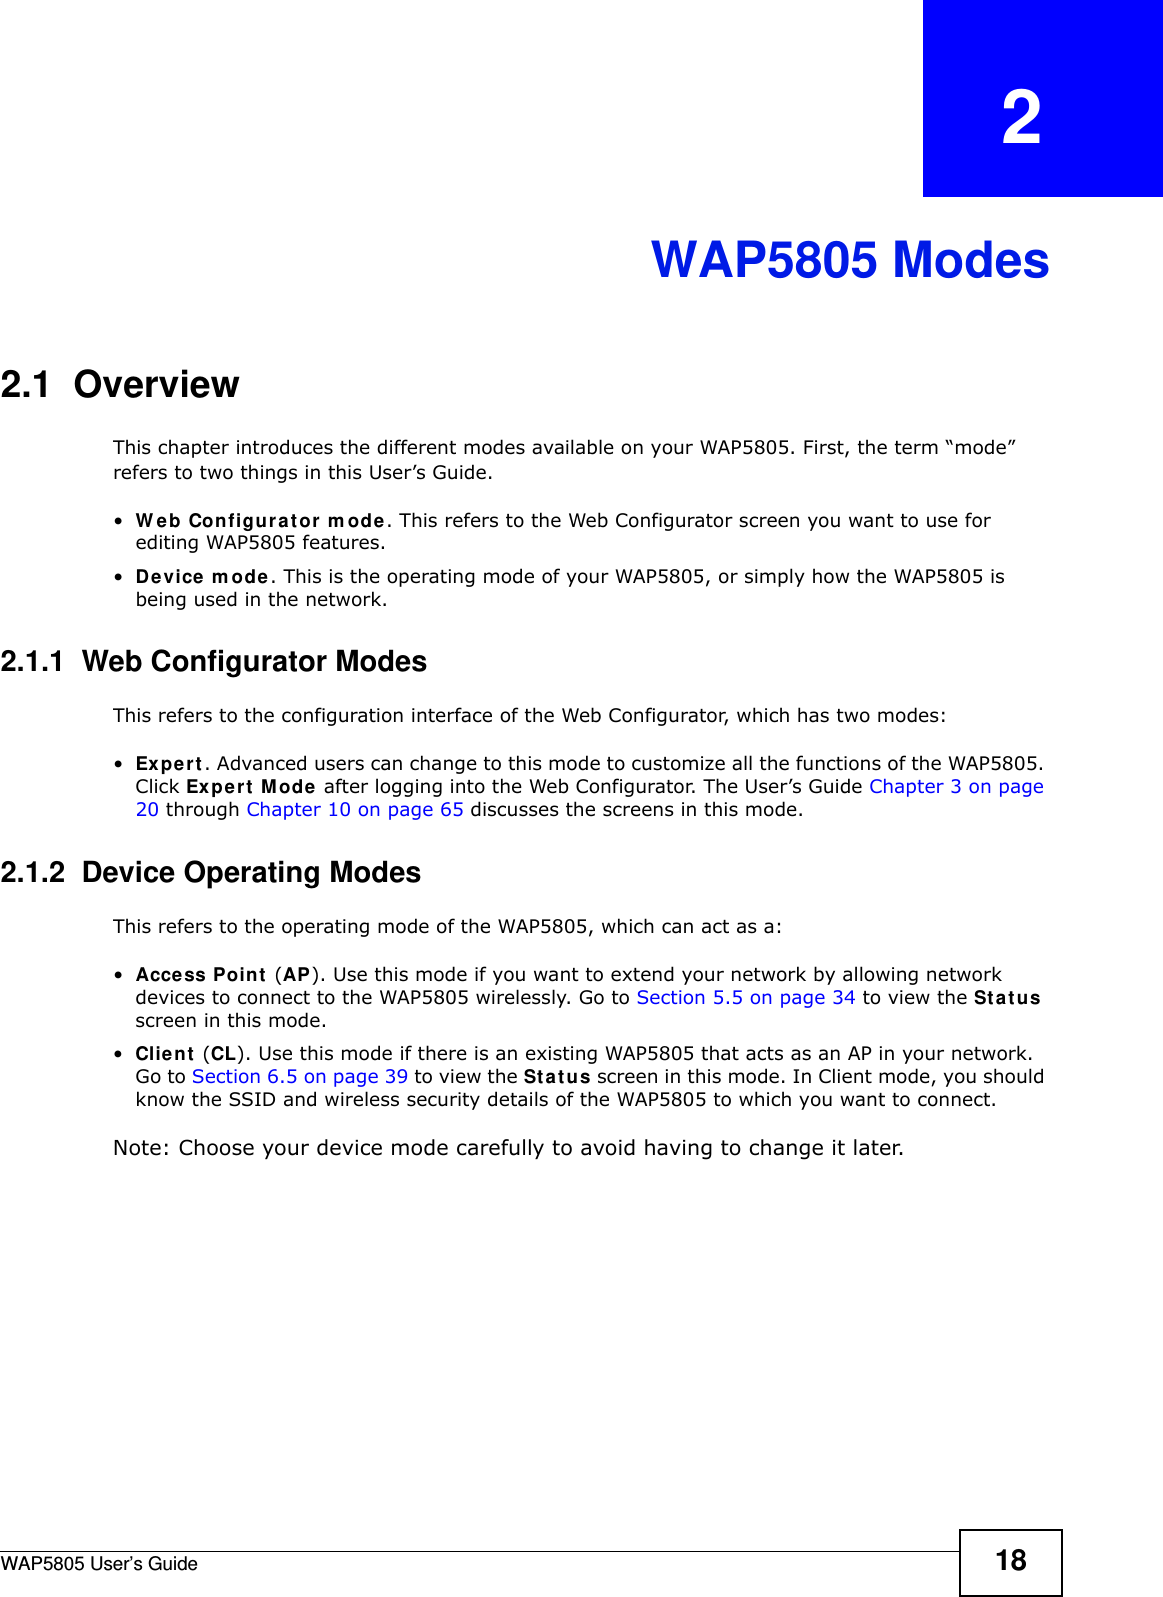 WAP5805 User’s Guide 18CHAPTER   2WAP5805 Modes2.1  OverviewThis chapter introduces the different modes available on your WAP5805. First, the term “mode” refers to two things in this User’s Guide.•Web Configurator mode. This refers to the Web Configurator screen you want to use for editing WAP5805 features. •Device mode. This is the operating mode of your WAP5805, or simply how the WAP5805 is being used in the network. 2.1.1  Web Configurator ModesThis refers to the configuration interface of the Web Configurator, which has two modes:•Expert. Advanced users can change to this mode to customize all the functions of the WAP5805. Click Expert Mode after logging into the Web Configurator. The User’s Guide Chapter 3 on page 20 through Chapter 10 on page 65 discusses the screens in this mode.2.1.2  Device Operating ModesThis refers to the operating mode of the WAP5805, which can act as a:•Access Point (AP). Use this mode if you want to extend your network by allowing network devices to connect to the WAP5805 wirelessly. Go to Section 5.5 on page 34 to view the Status screen in this mode.•Client (CL). Use this mode if there is an existing WAP5805 that acts as an AP in your network. Go to Section 6.5 on page 39 to view the Status screen in this mode. In Client mode, you should know the SSID and wireless security details of the WAP5805 to which you want to connect.Note: Choose your device mode carefully to avoid having to change it later.